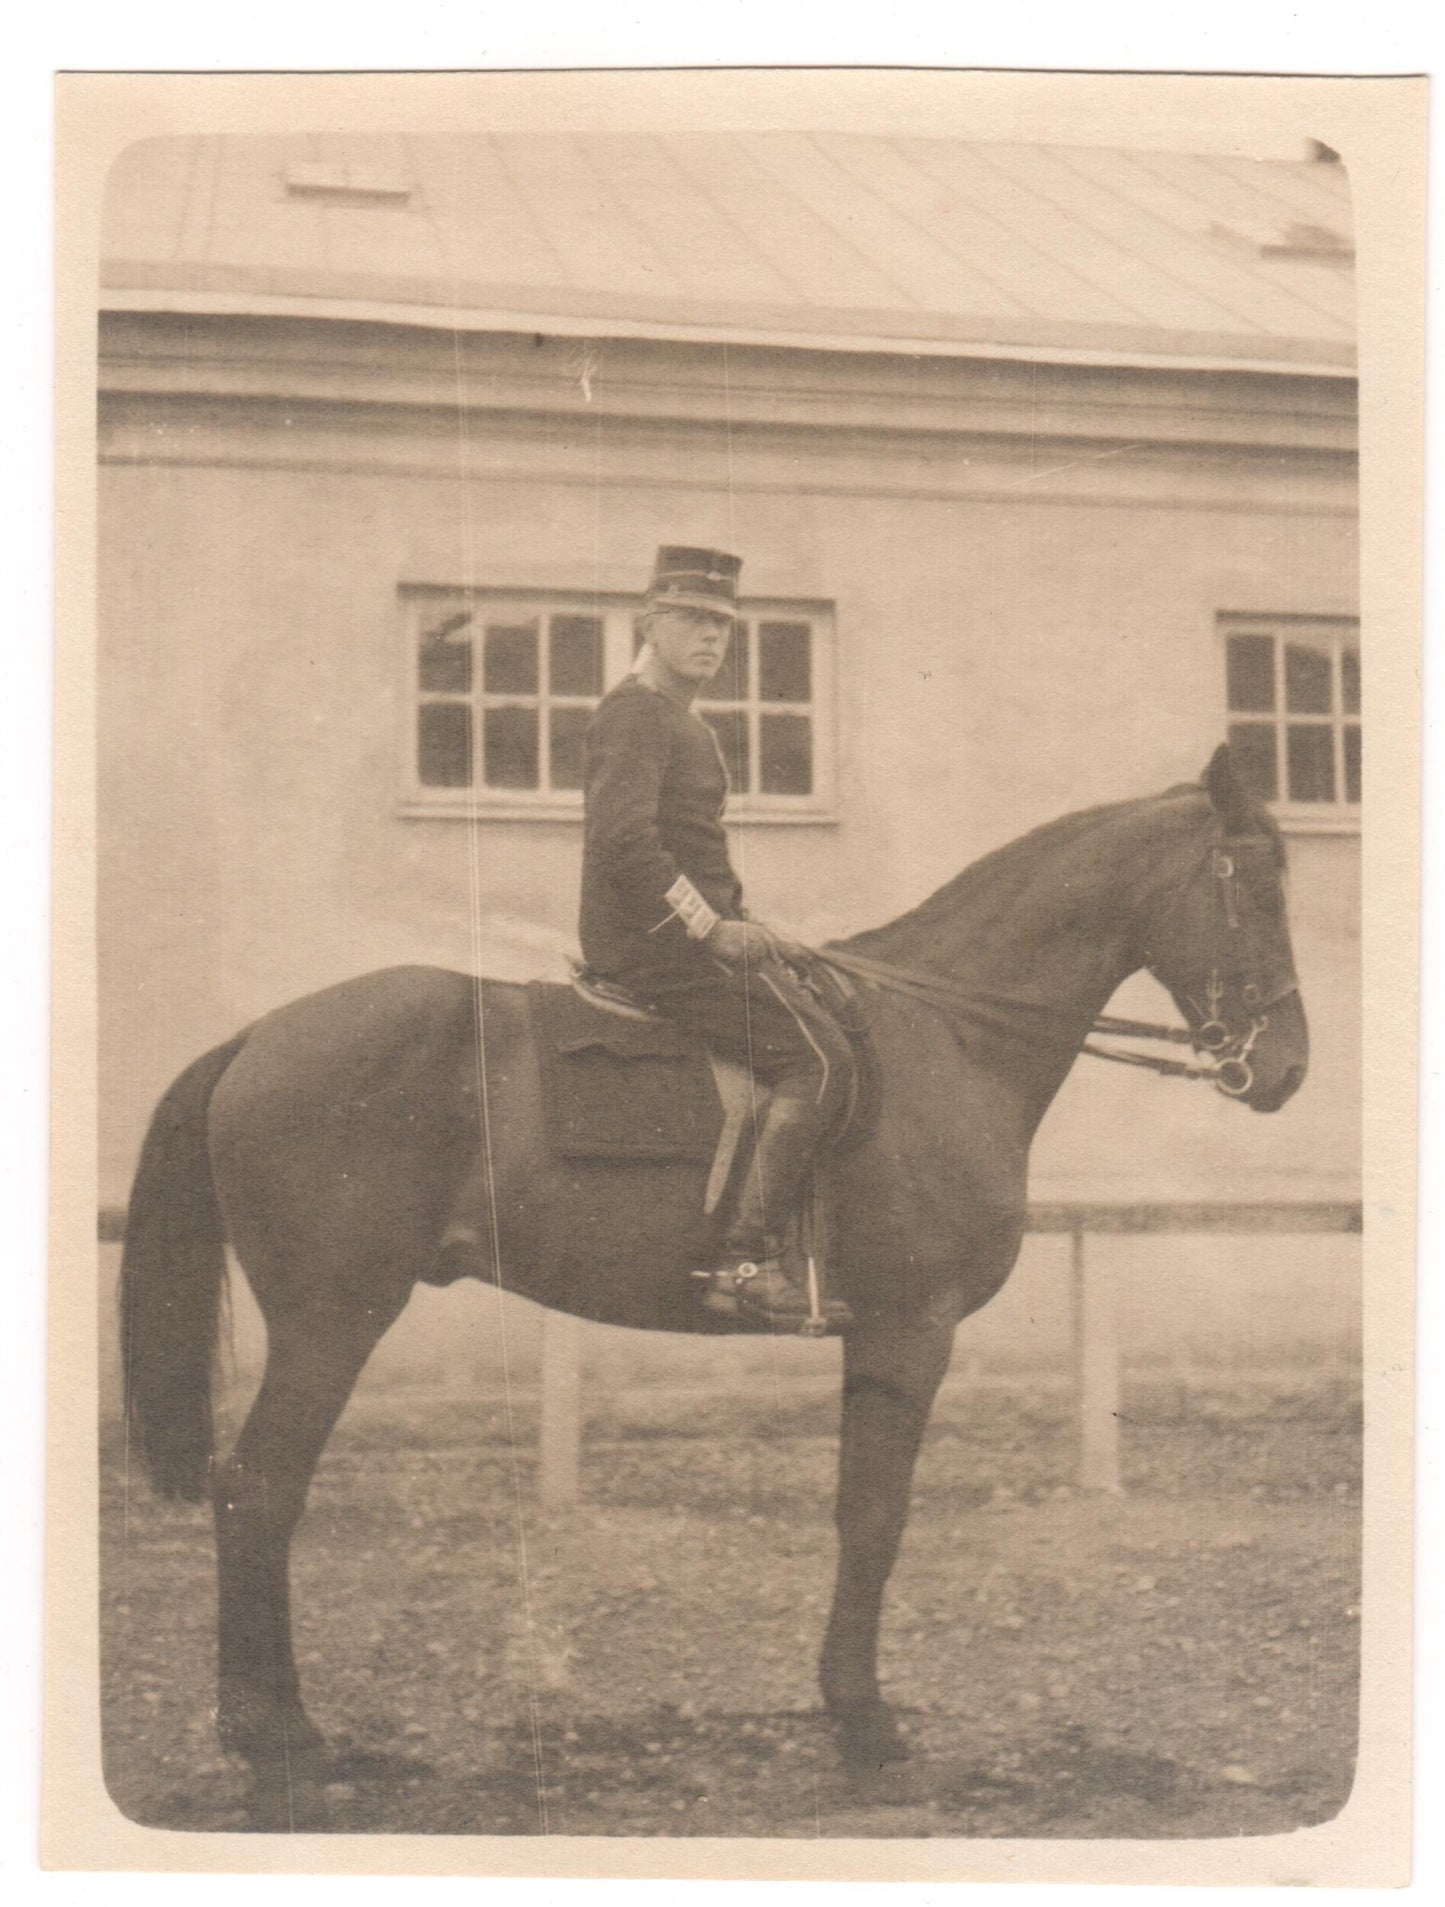 Vintage Photo - Military Photography - Portrait of a Soldier on a Horse - Europe